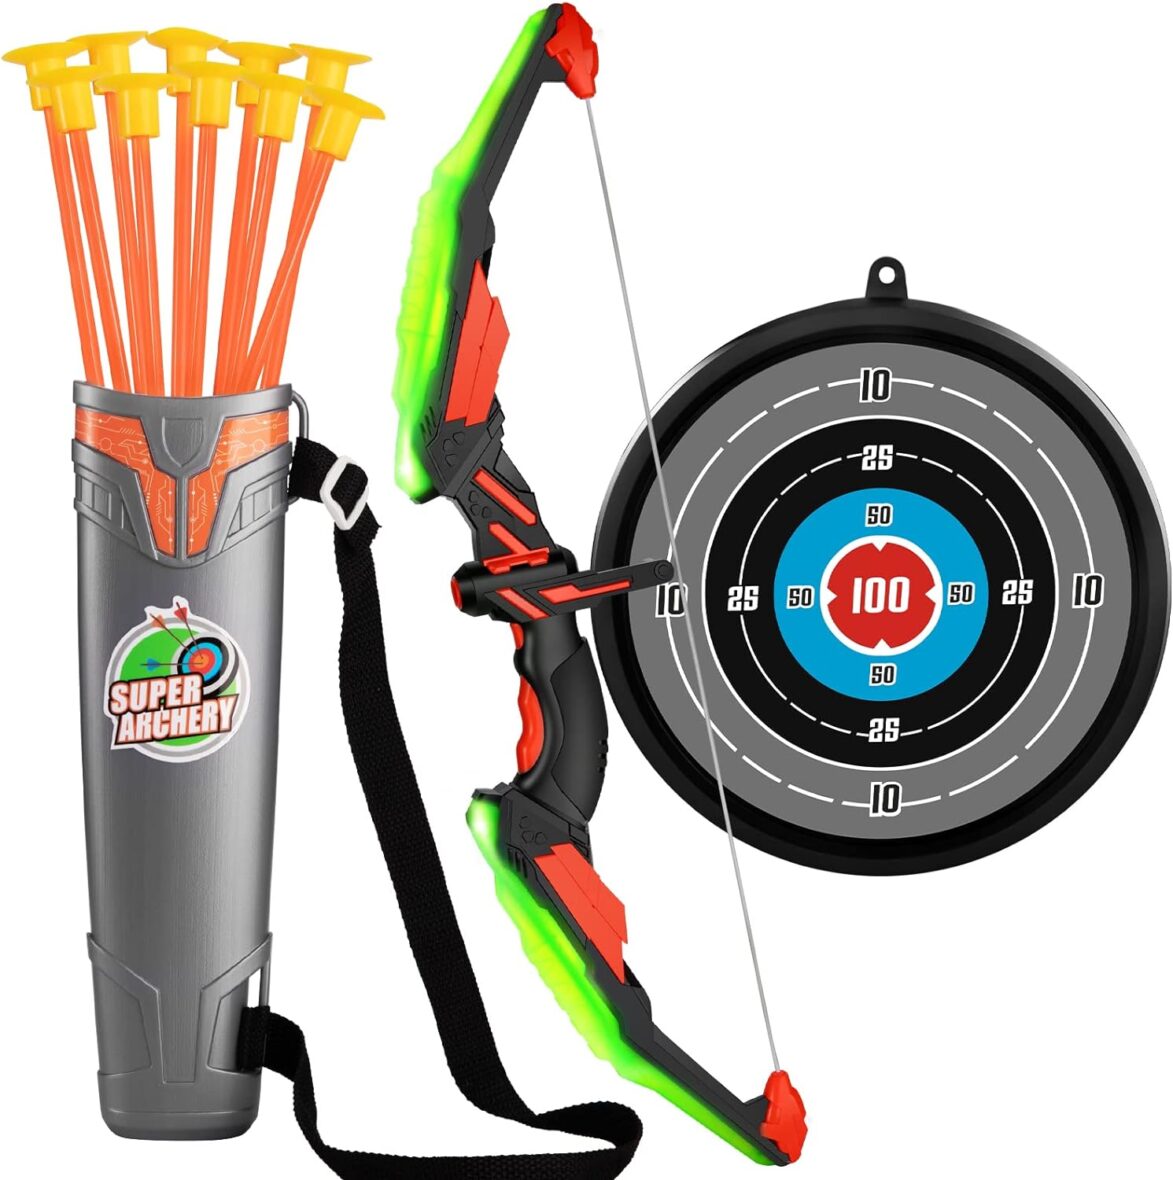 TEMI Kids Bow and Arrow Set – LED Light Up Archery Toy Set with 10 Suction Cup Arrows, Target & Quiver, Indoor and Outdoor Toy